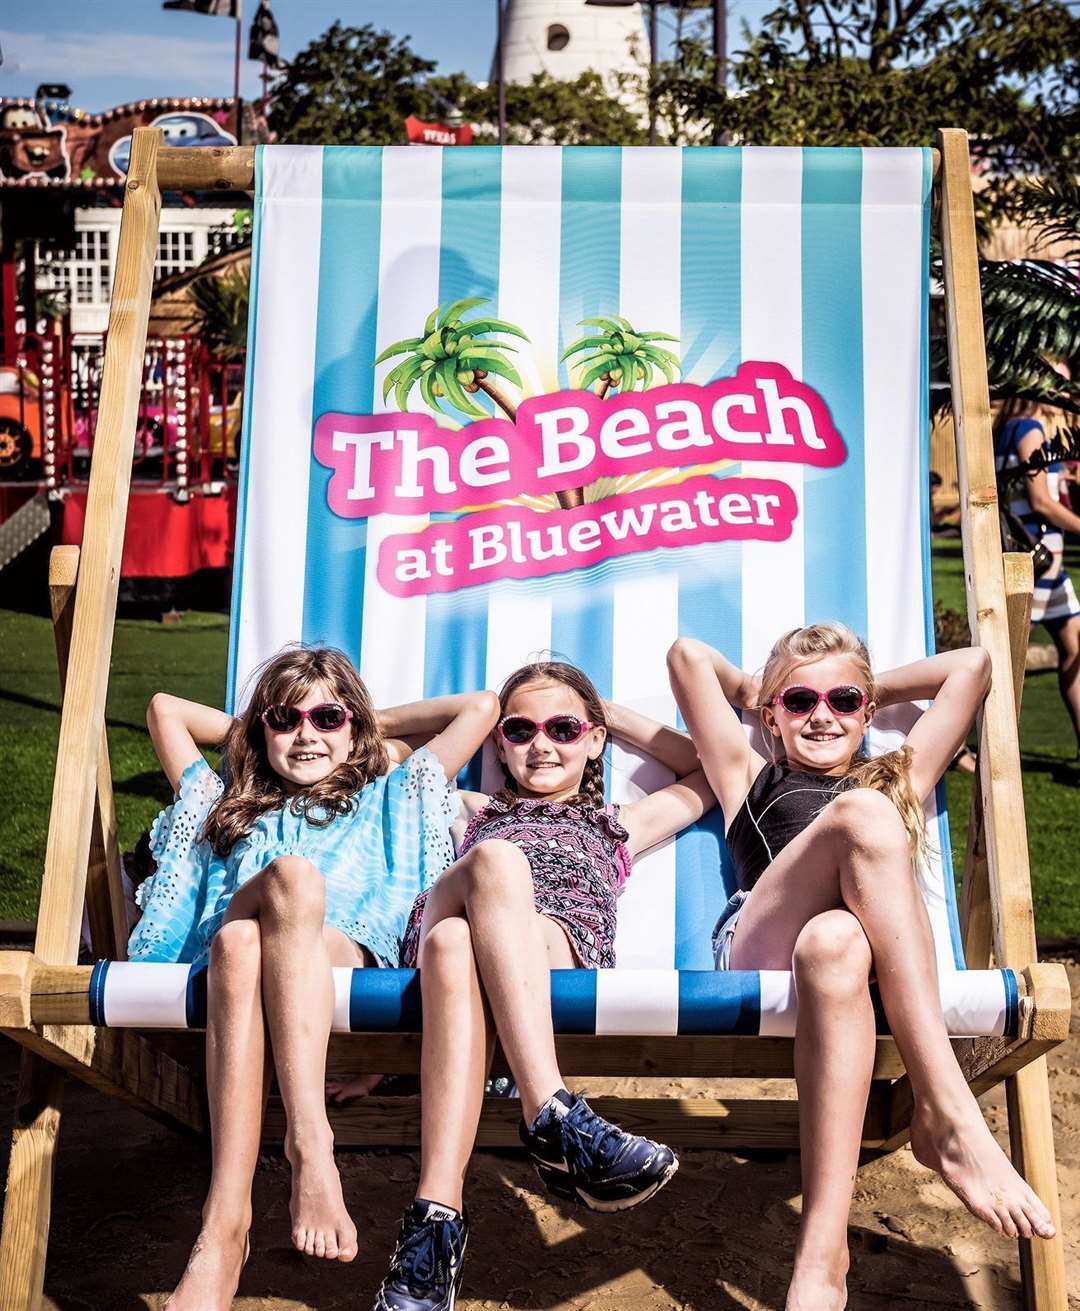 The Beach is back at Bluewater